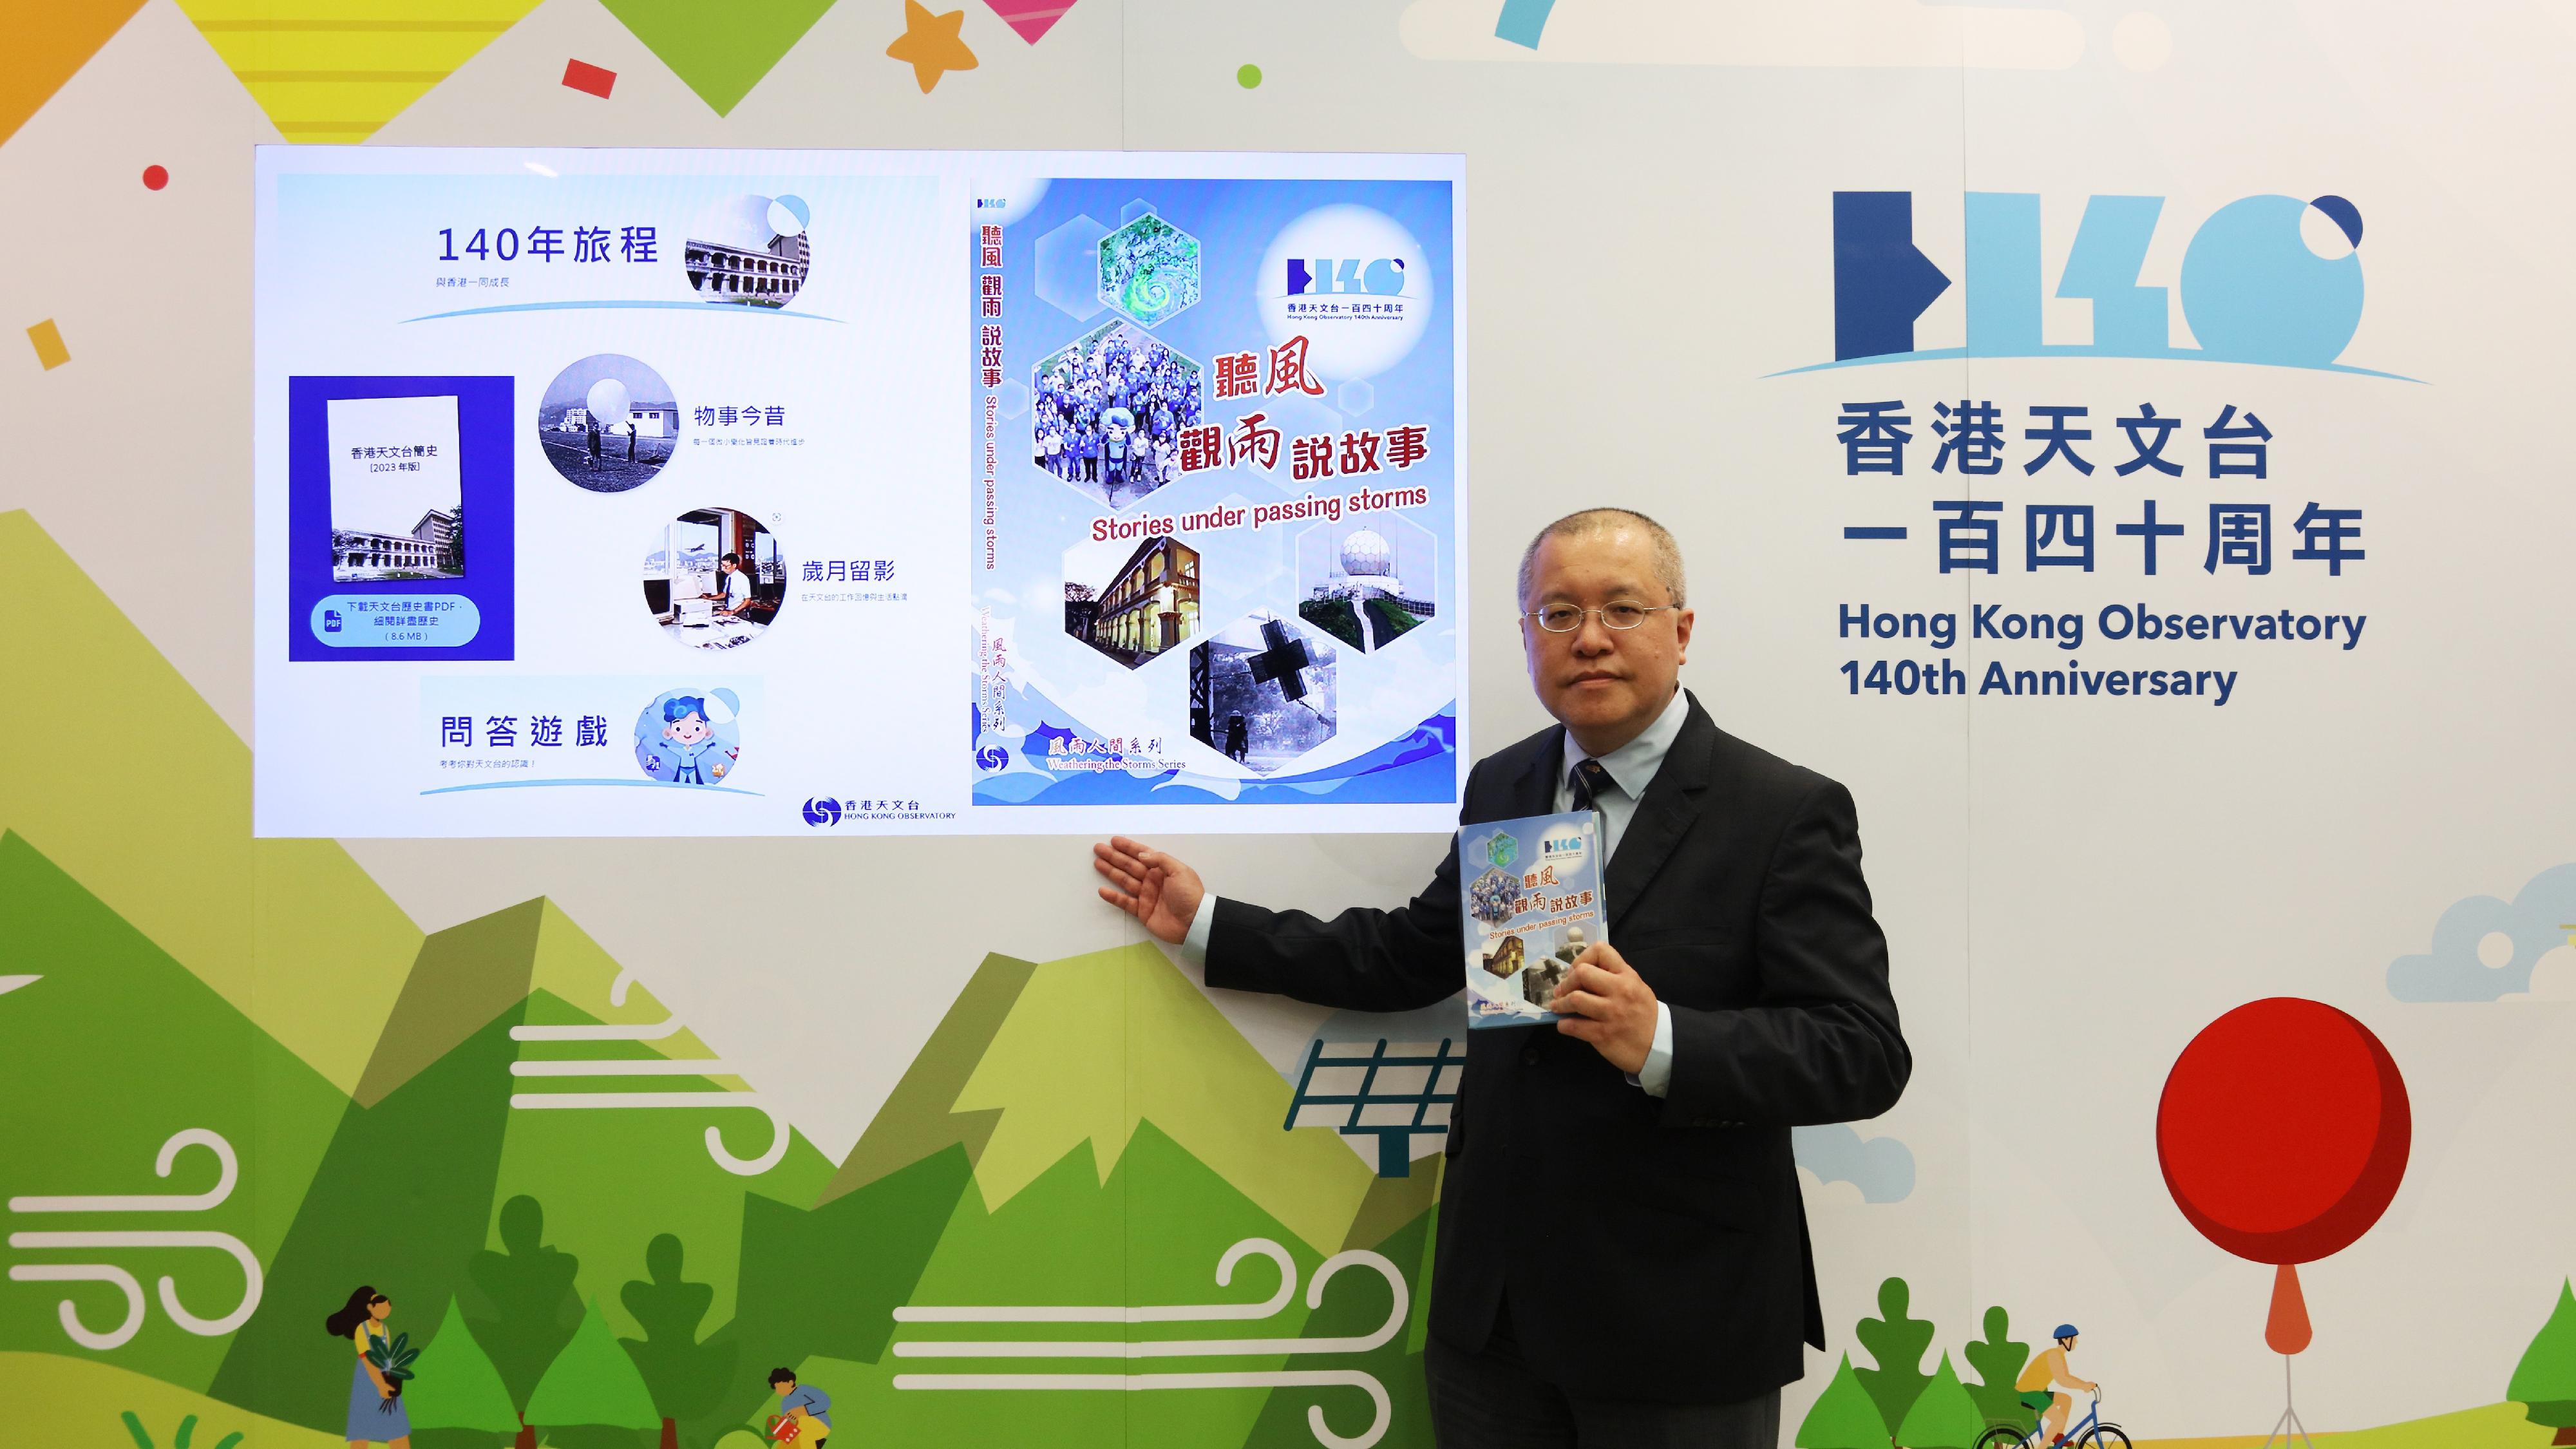 The Director of the Hong Kong Observatory (HKO), Mr Chan Pak-wai, introduced during the press briefing today (March 23) the dedicated webpage "HKO 140th Anniversary" and the 140th anniversary book "Stories under passing storms" that will be published later this year.